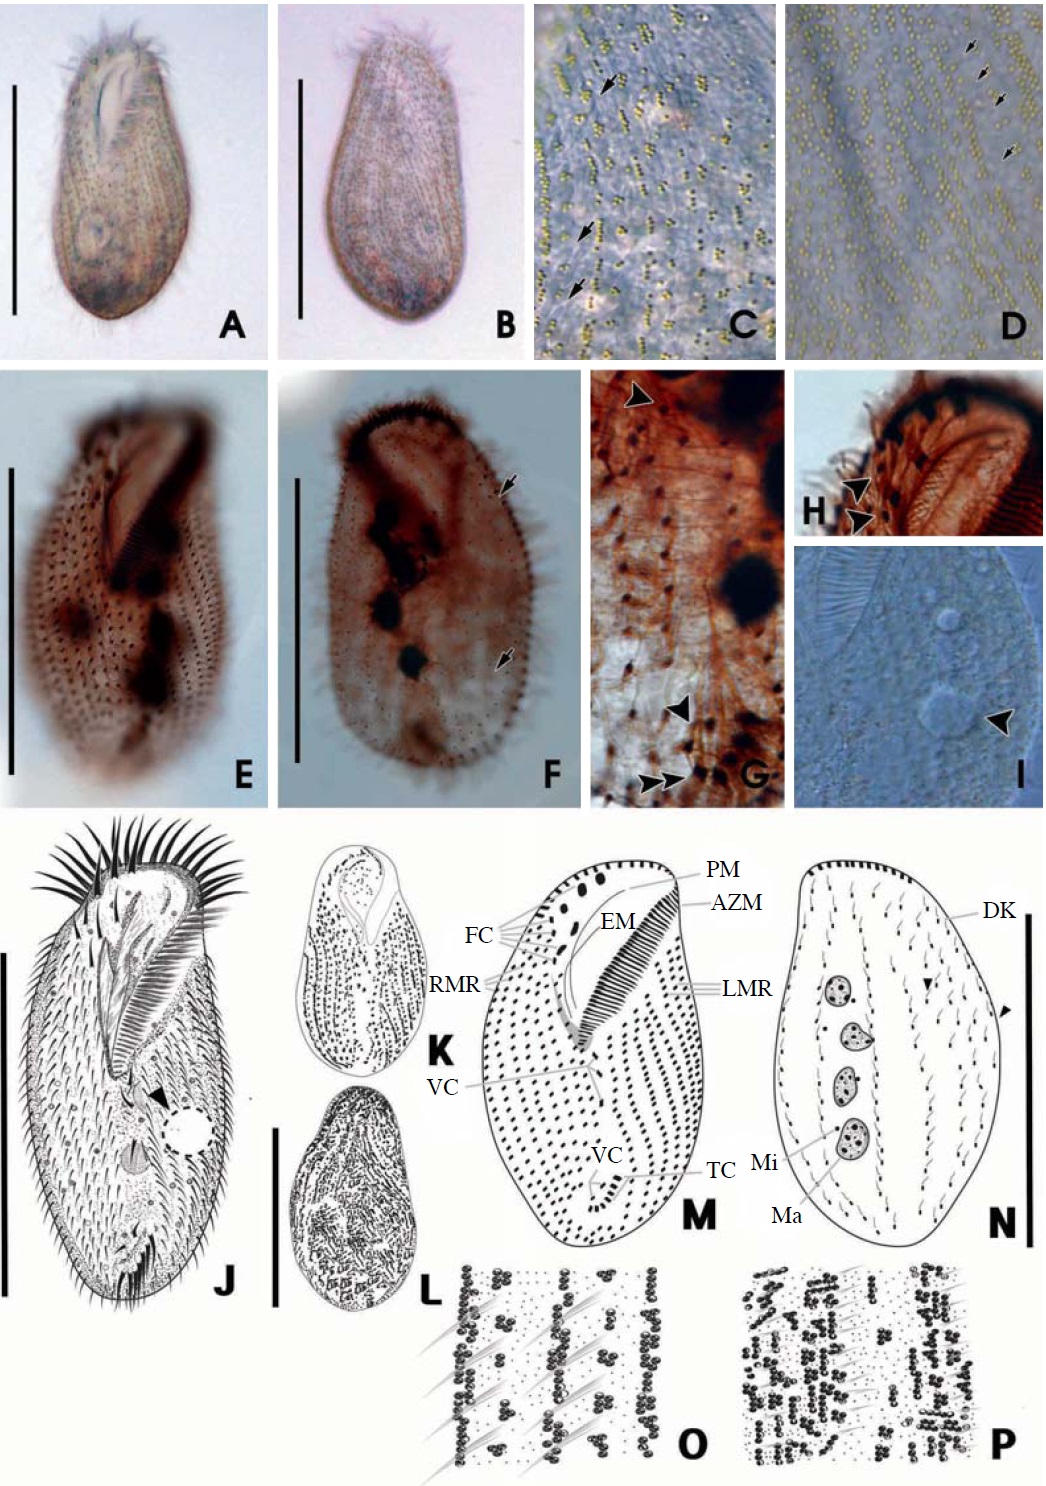 Morphology of Ponturostyla enigmatica from live (A-D, I-L, O, P) and protargol impregnated (E-H, M, N) specimens. A, C, I, Ventral views of live specimens: C, Greenish cortical granules arranged in lines between cirri (arrows); I, Arrowhead marking the contractile vacuole. B, Dorsal view of live specimen; D, Irregular distribution of greenish cortical granules on the dorsal side; E, F, Infraciliature of the ventral (E) and dorsal (F) side: F, Arrow marking shortened dorsal kineties; G, 5 (3+2) ventral cirri (arrowheads) and 5 transverse cirri (double arrowhead); H, 8 frontal cirri (arrowhead). J-P, Drawing view of P. enigmatica: J-L, The ventral (J, K) and dorsal (L) view of live specimen; J, Arrowhead indicating the contractile vacuole; M, N, Infraciliature of the ventral (M) and dorsal (N) side; O, P, Arrangement of cirri and cortical granules of the ventral (O) and dorsal (P) side. AZM, adoral zone of membranelles; DK, dorsal kineties; EM, endoral membrane; FC, frontal cirri; LMR, left marginal row; Ma, macronuclei; Mi, micronuclei; PM, paroral membrane; RMR, right marginal row; TC, transverse cirri; VC, ventral cirri. Scale bars: A, B, E, F, J, L, N=100 μm.